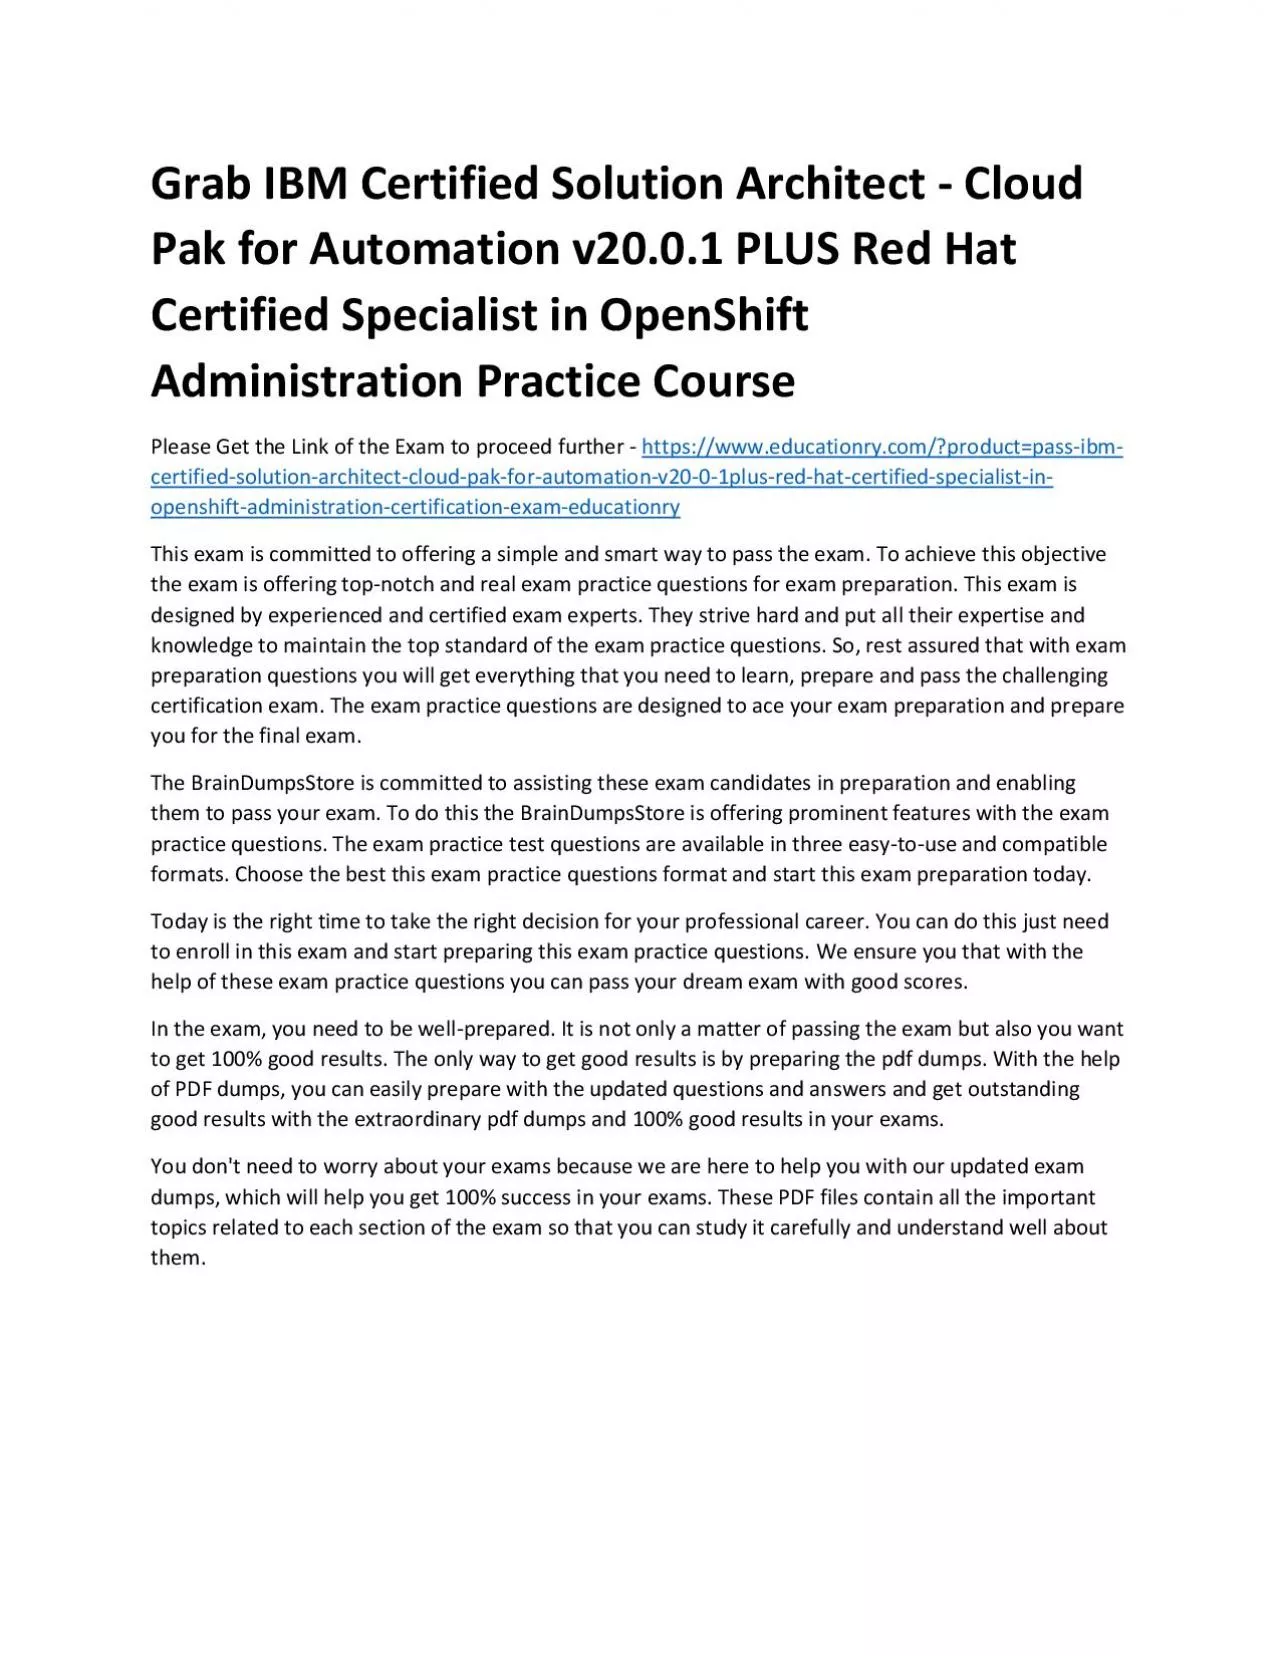 C0006900: IBM Certified Solution Architect - Cloud Pak for Automation v20.0.1 PLUS Red